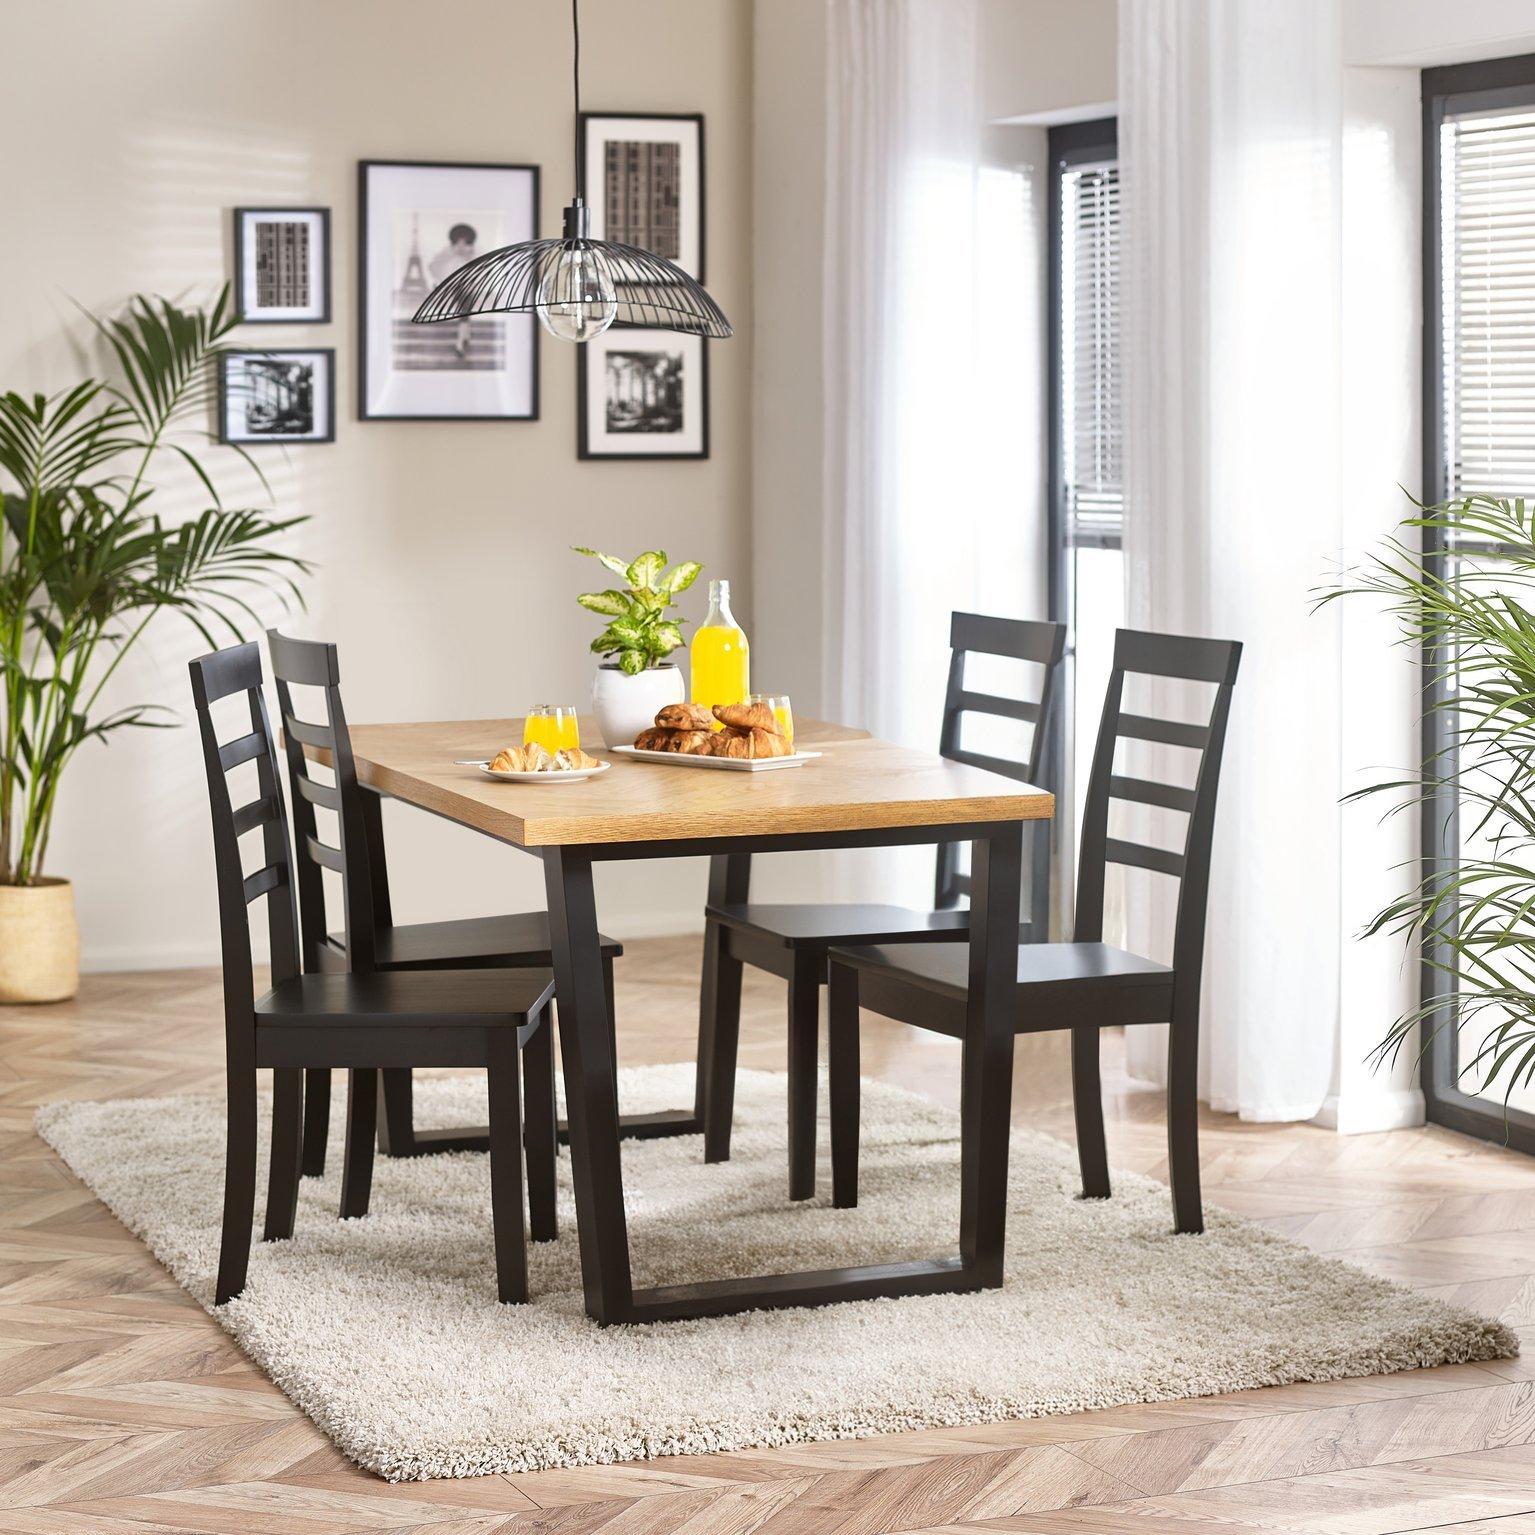 Cotswold Wooden Dining Table & 4 Whitby Black Dining Chairs